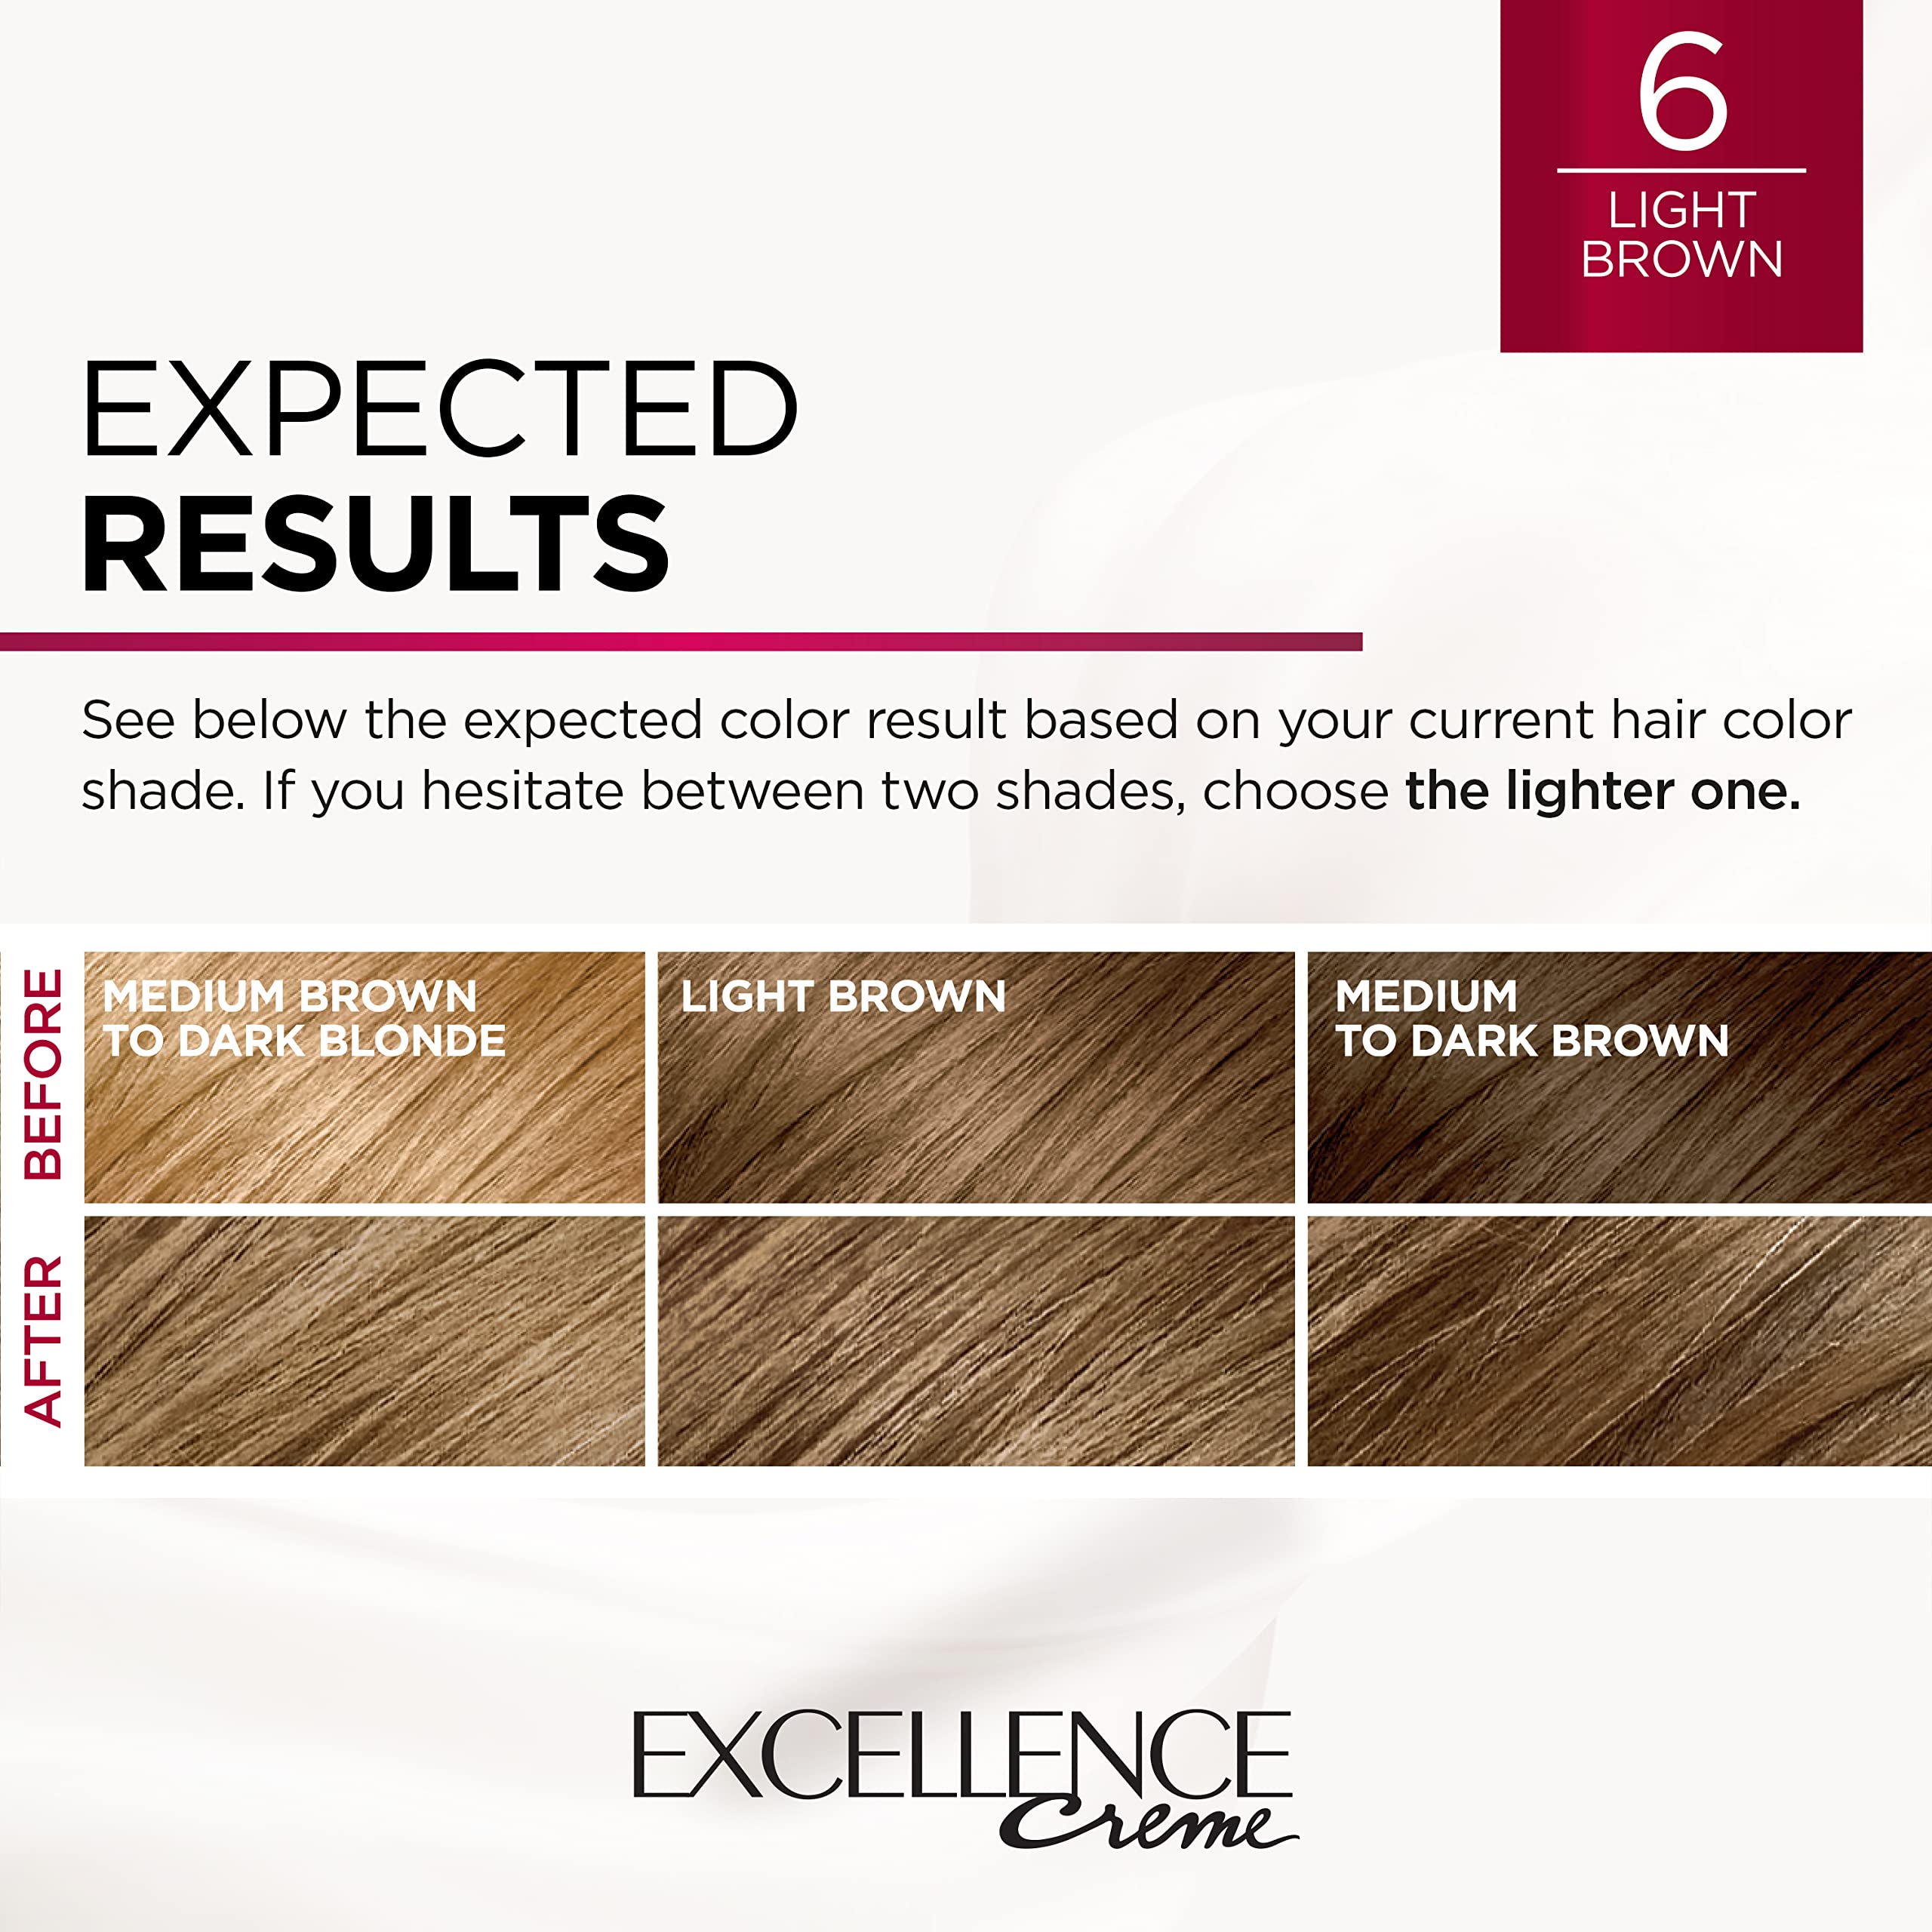 L'Oreal Paris Excellence Creme Permanent Triple Care Hair Color, 6 Light Brown Hair Dye Kit, Gray Coverage For Up to 8 Weeks, All Hair Types, Pack of 1